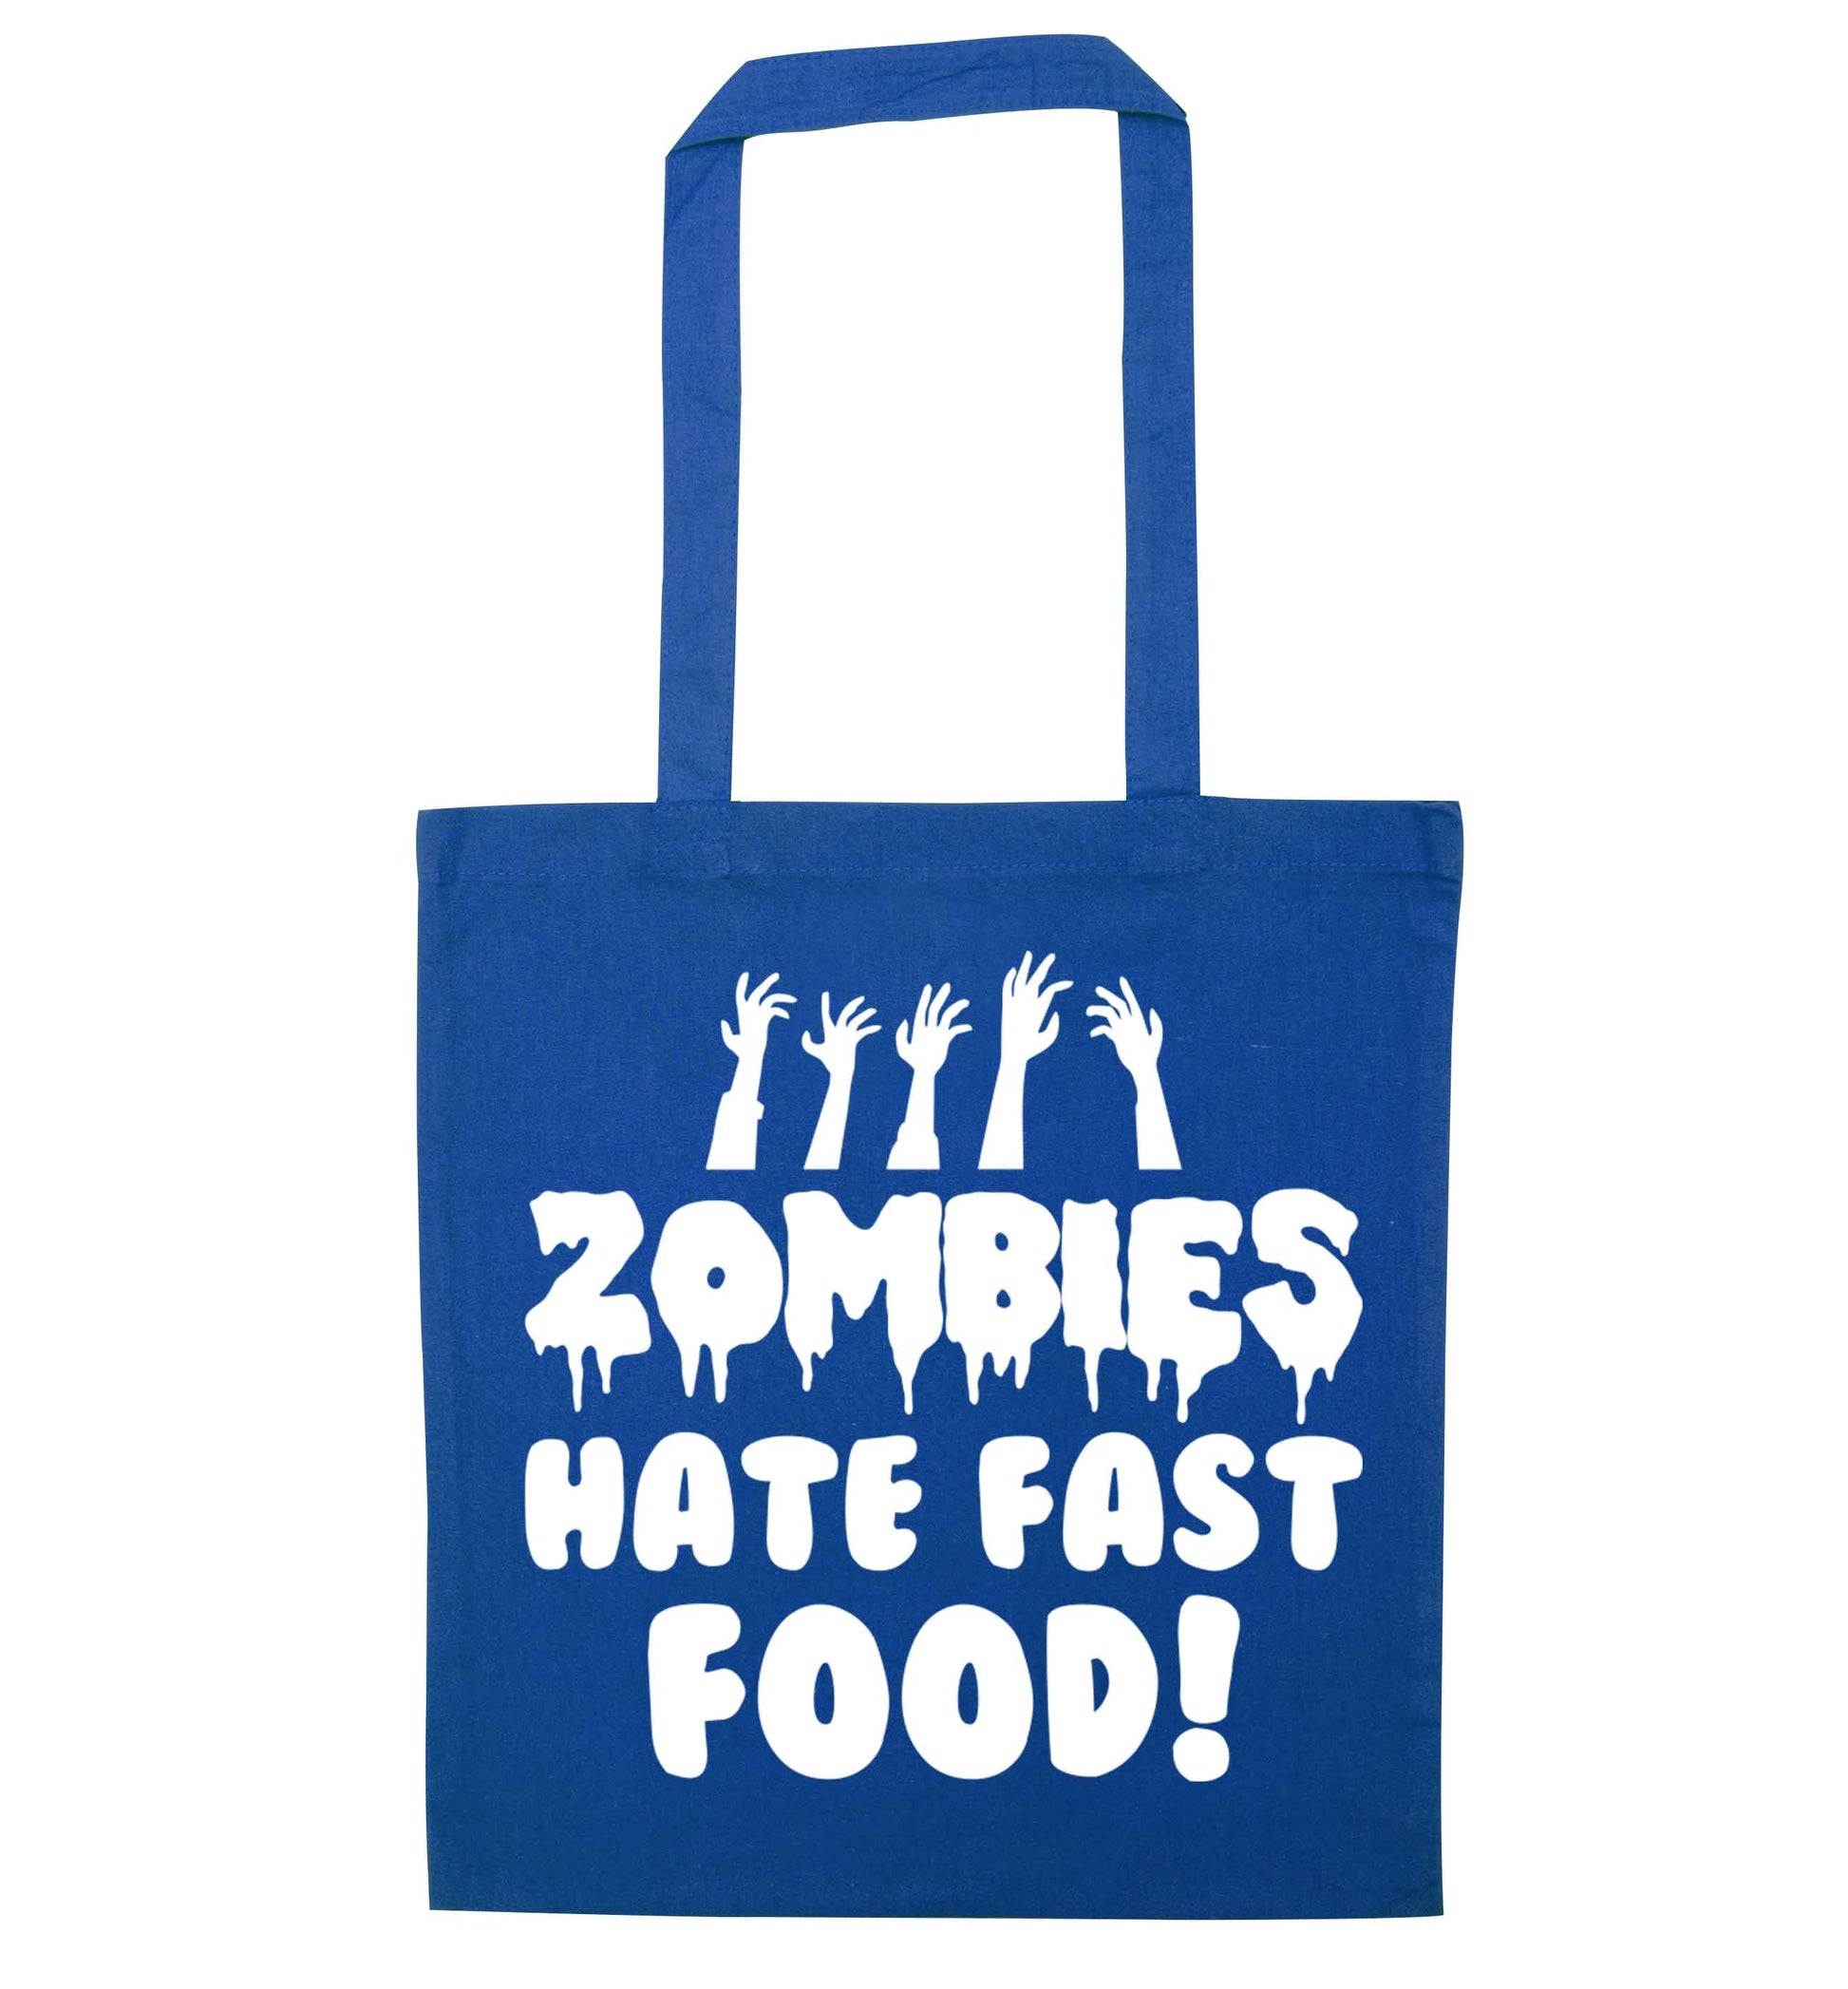 Zombies hate fast food blue tote bag